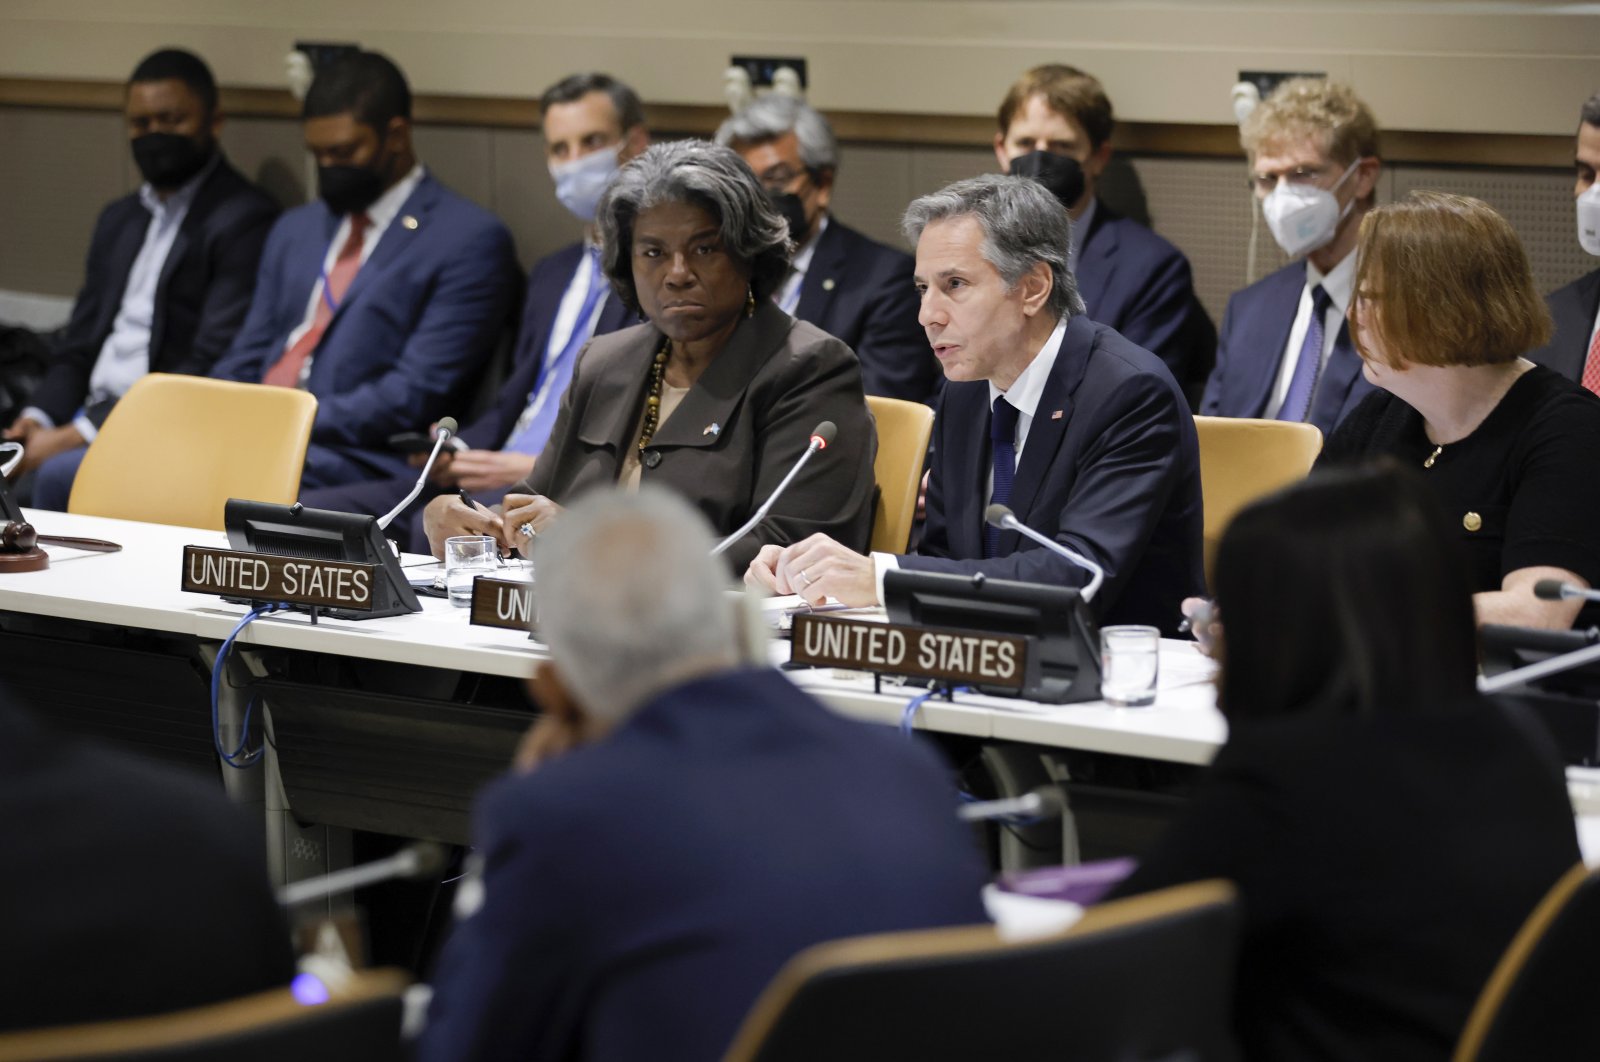 Secretary of State Antony Blinken sits with U.S. ambassador to U.N. Linda Thomas-Greenfield, as they meet with African ministers at U.N. headquarters, May 18, 2022. (AP Photo)